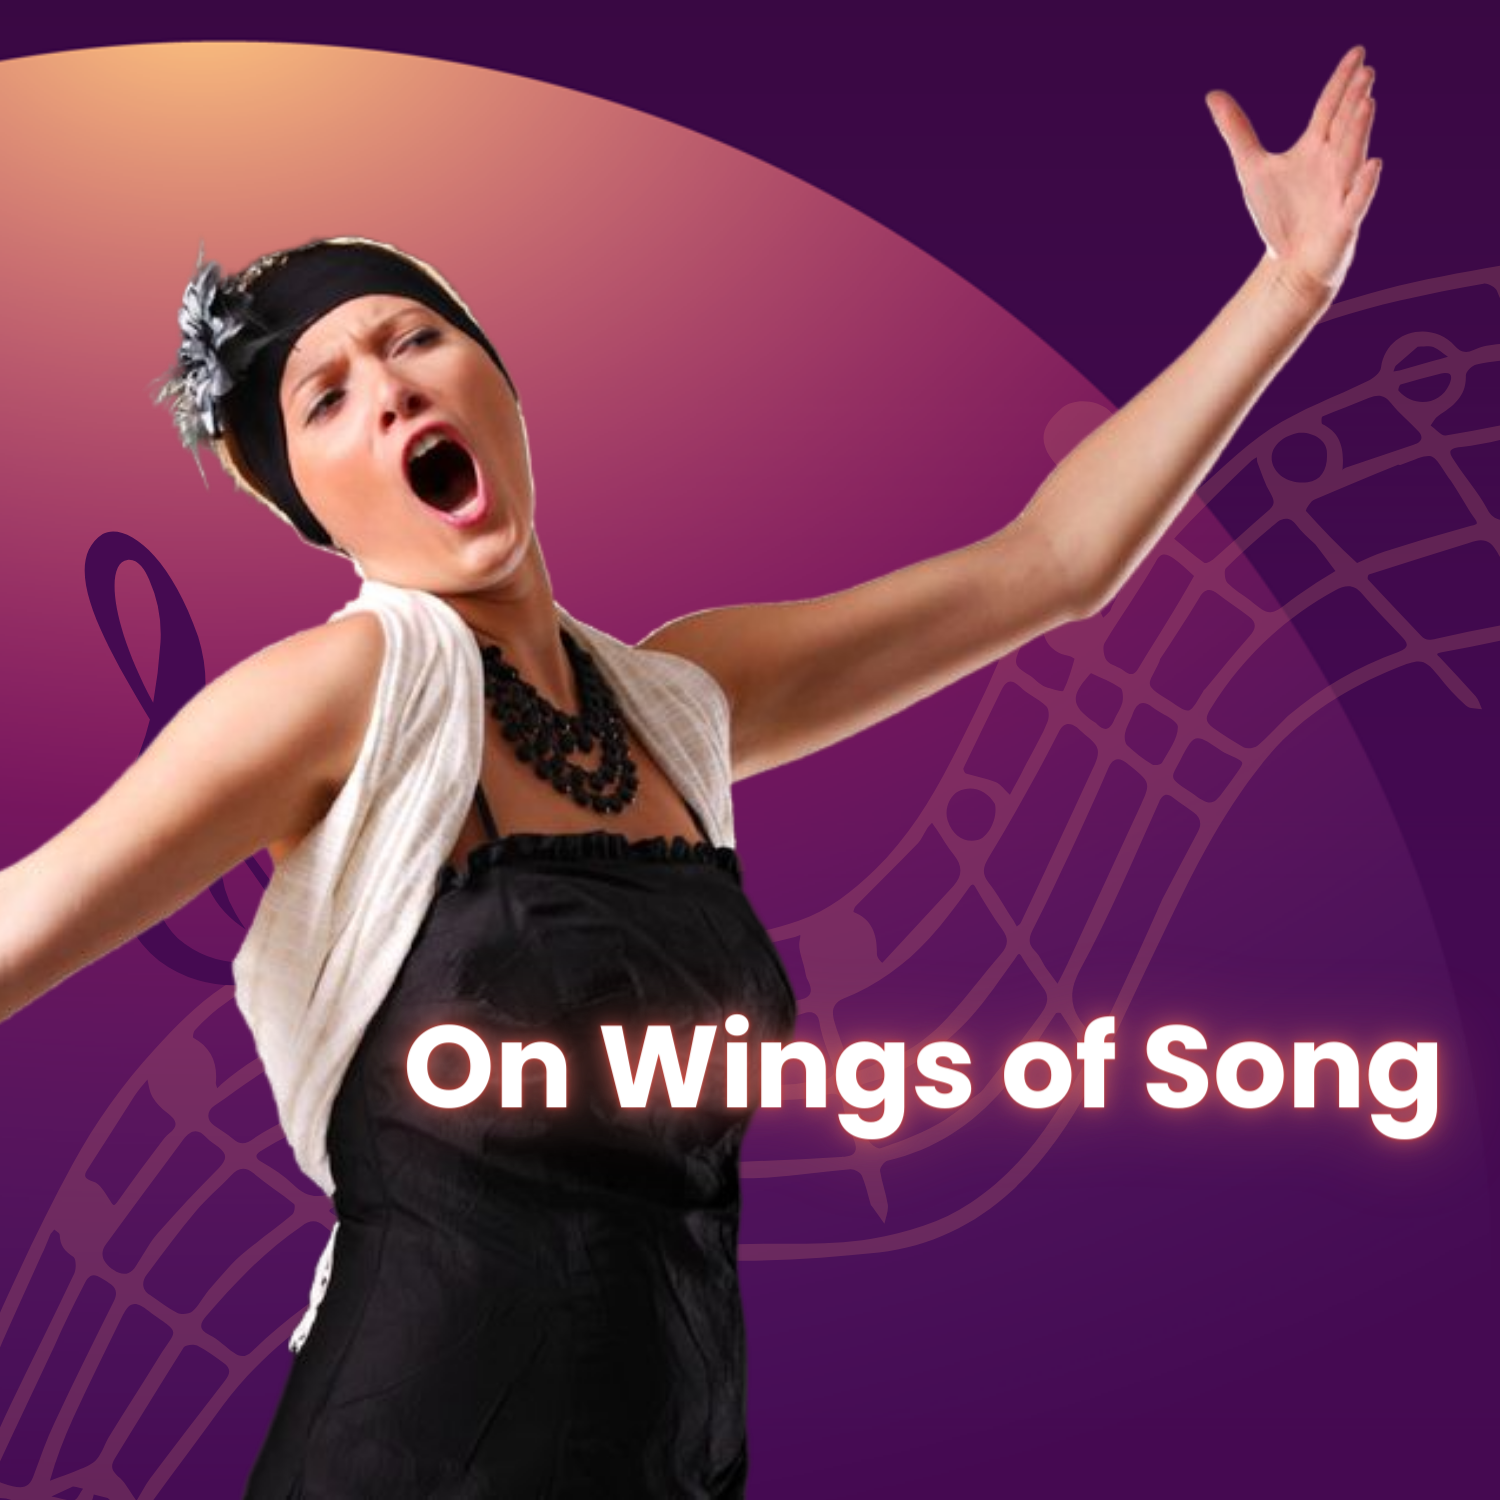 On Wings of Song - March 17